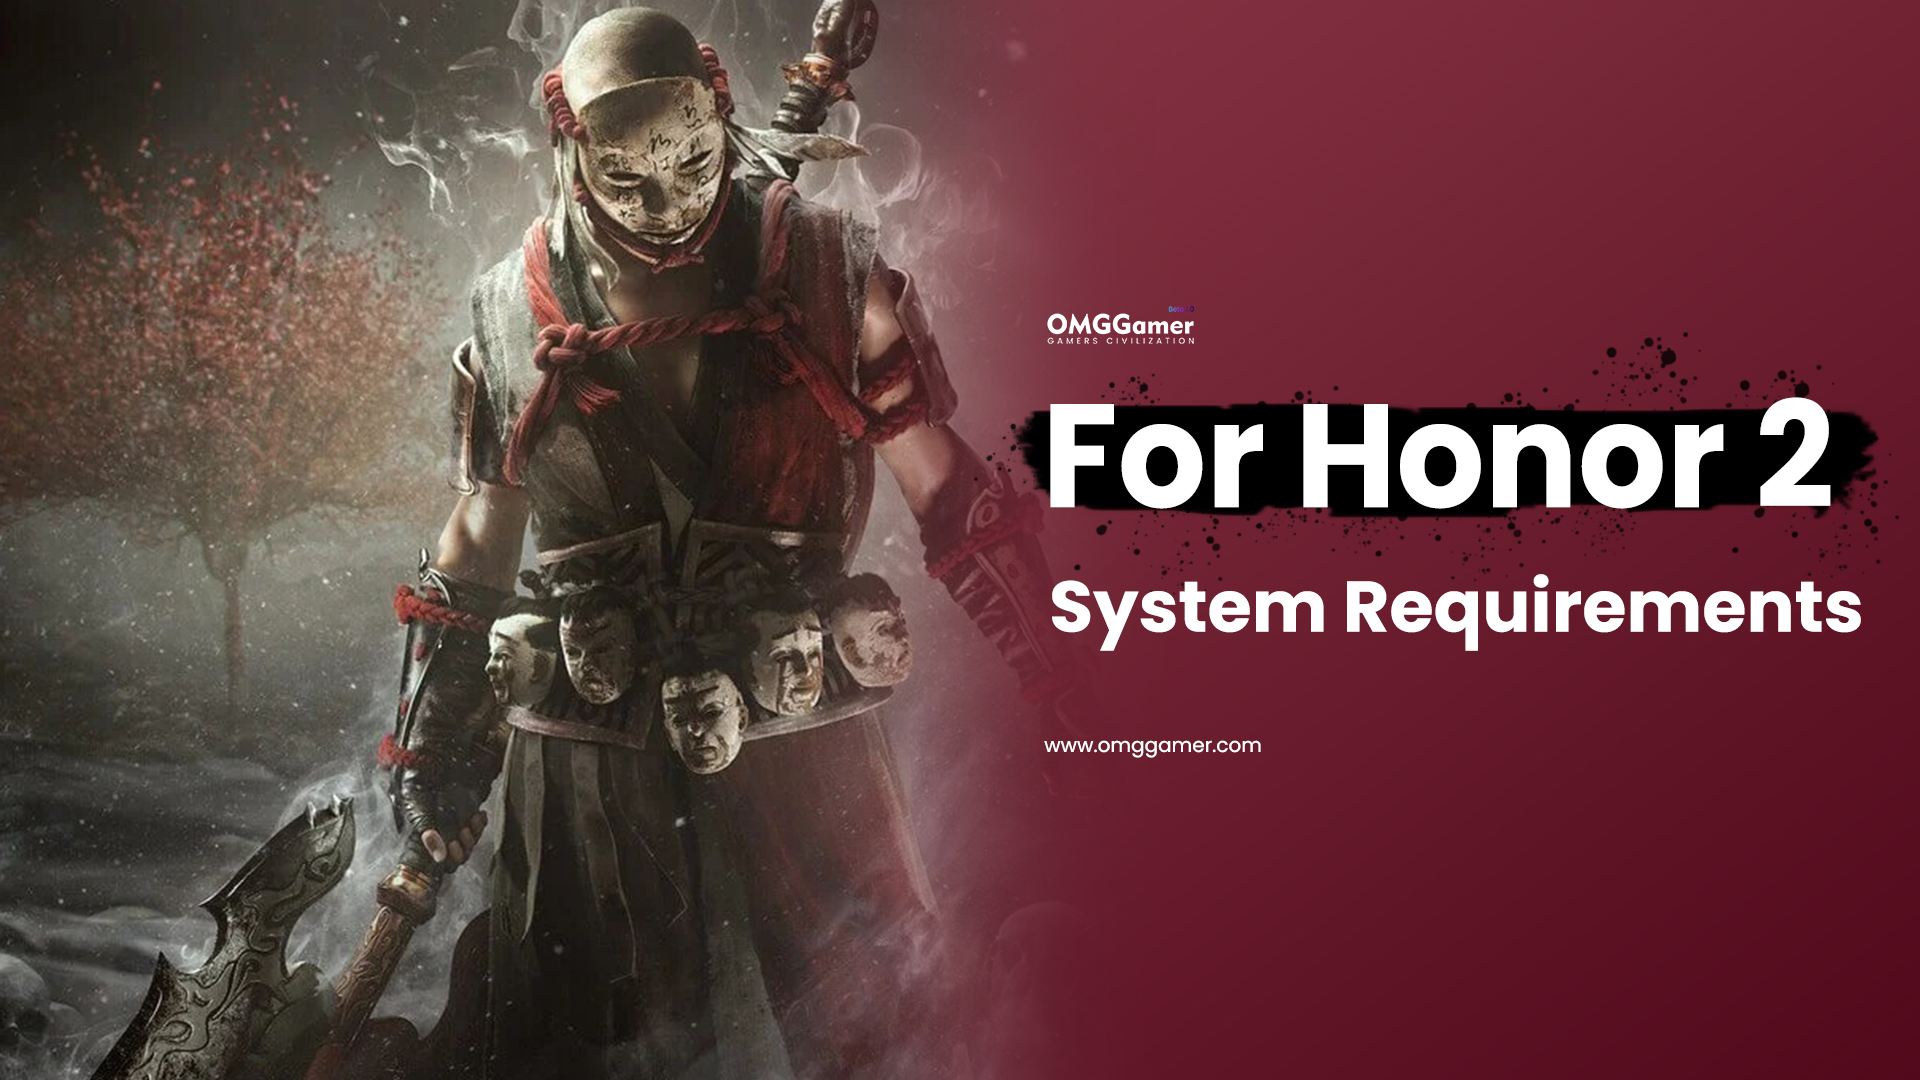 For Honor 2 System Requirements